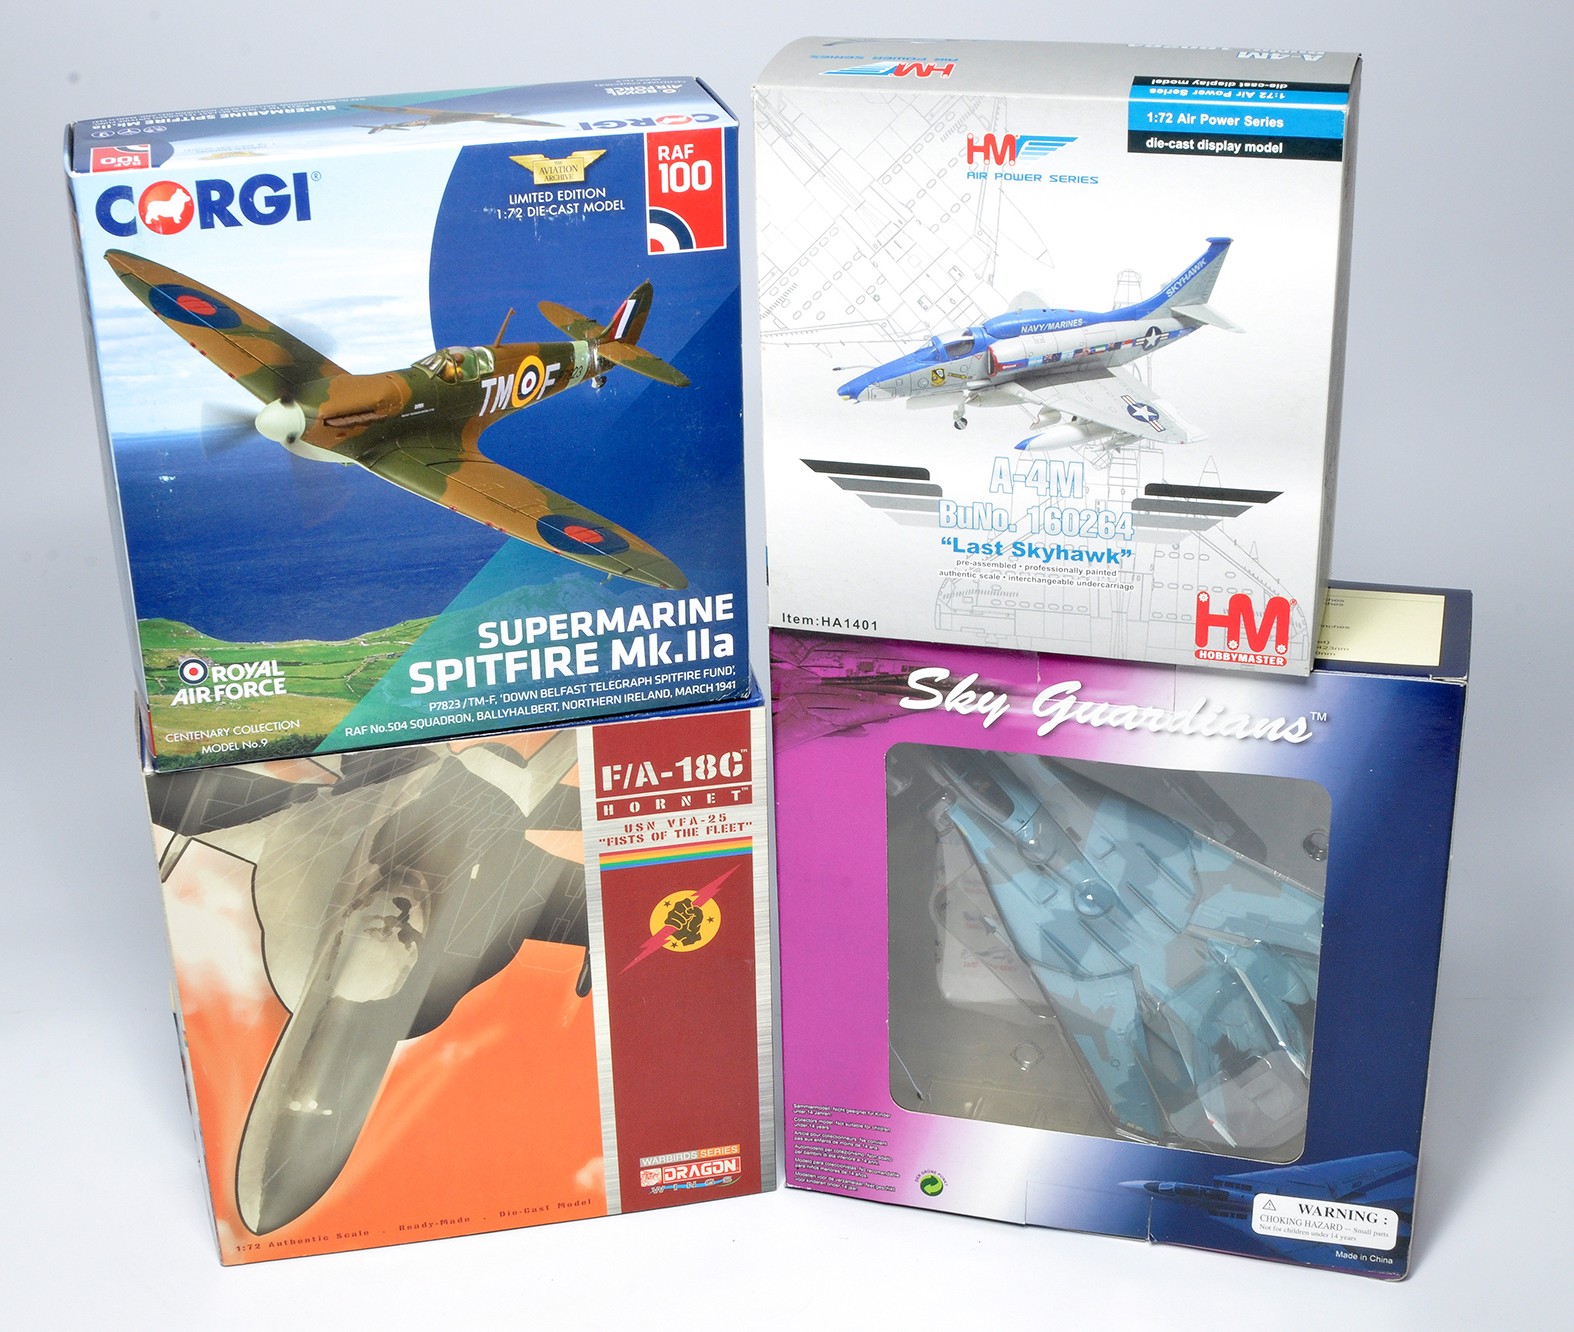 A group of 1/72 diecast model aircraft from Corgi, Hobby Master and others including Spitfire, F/A